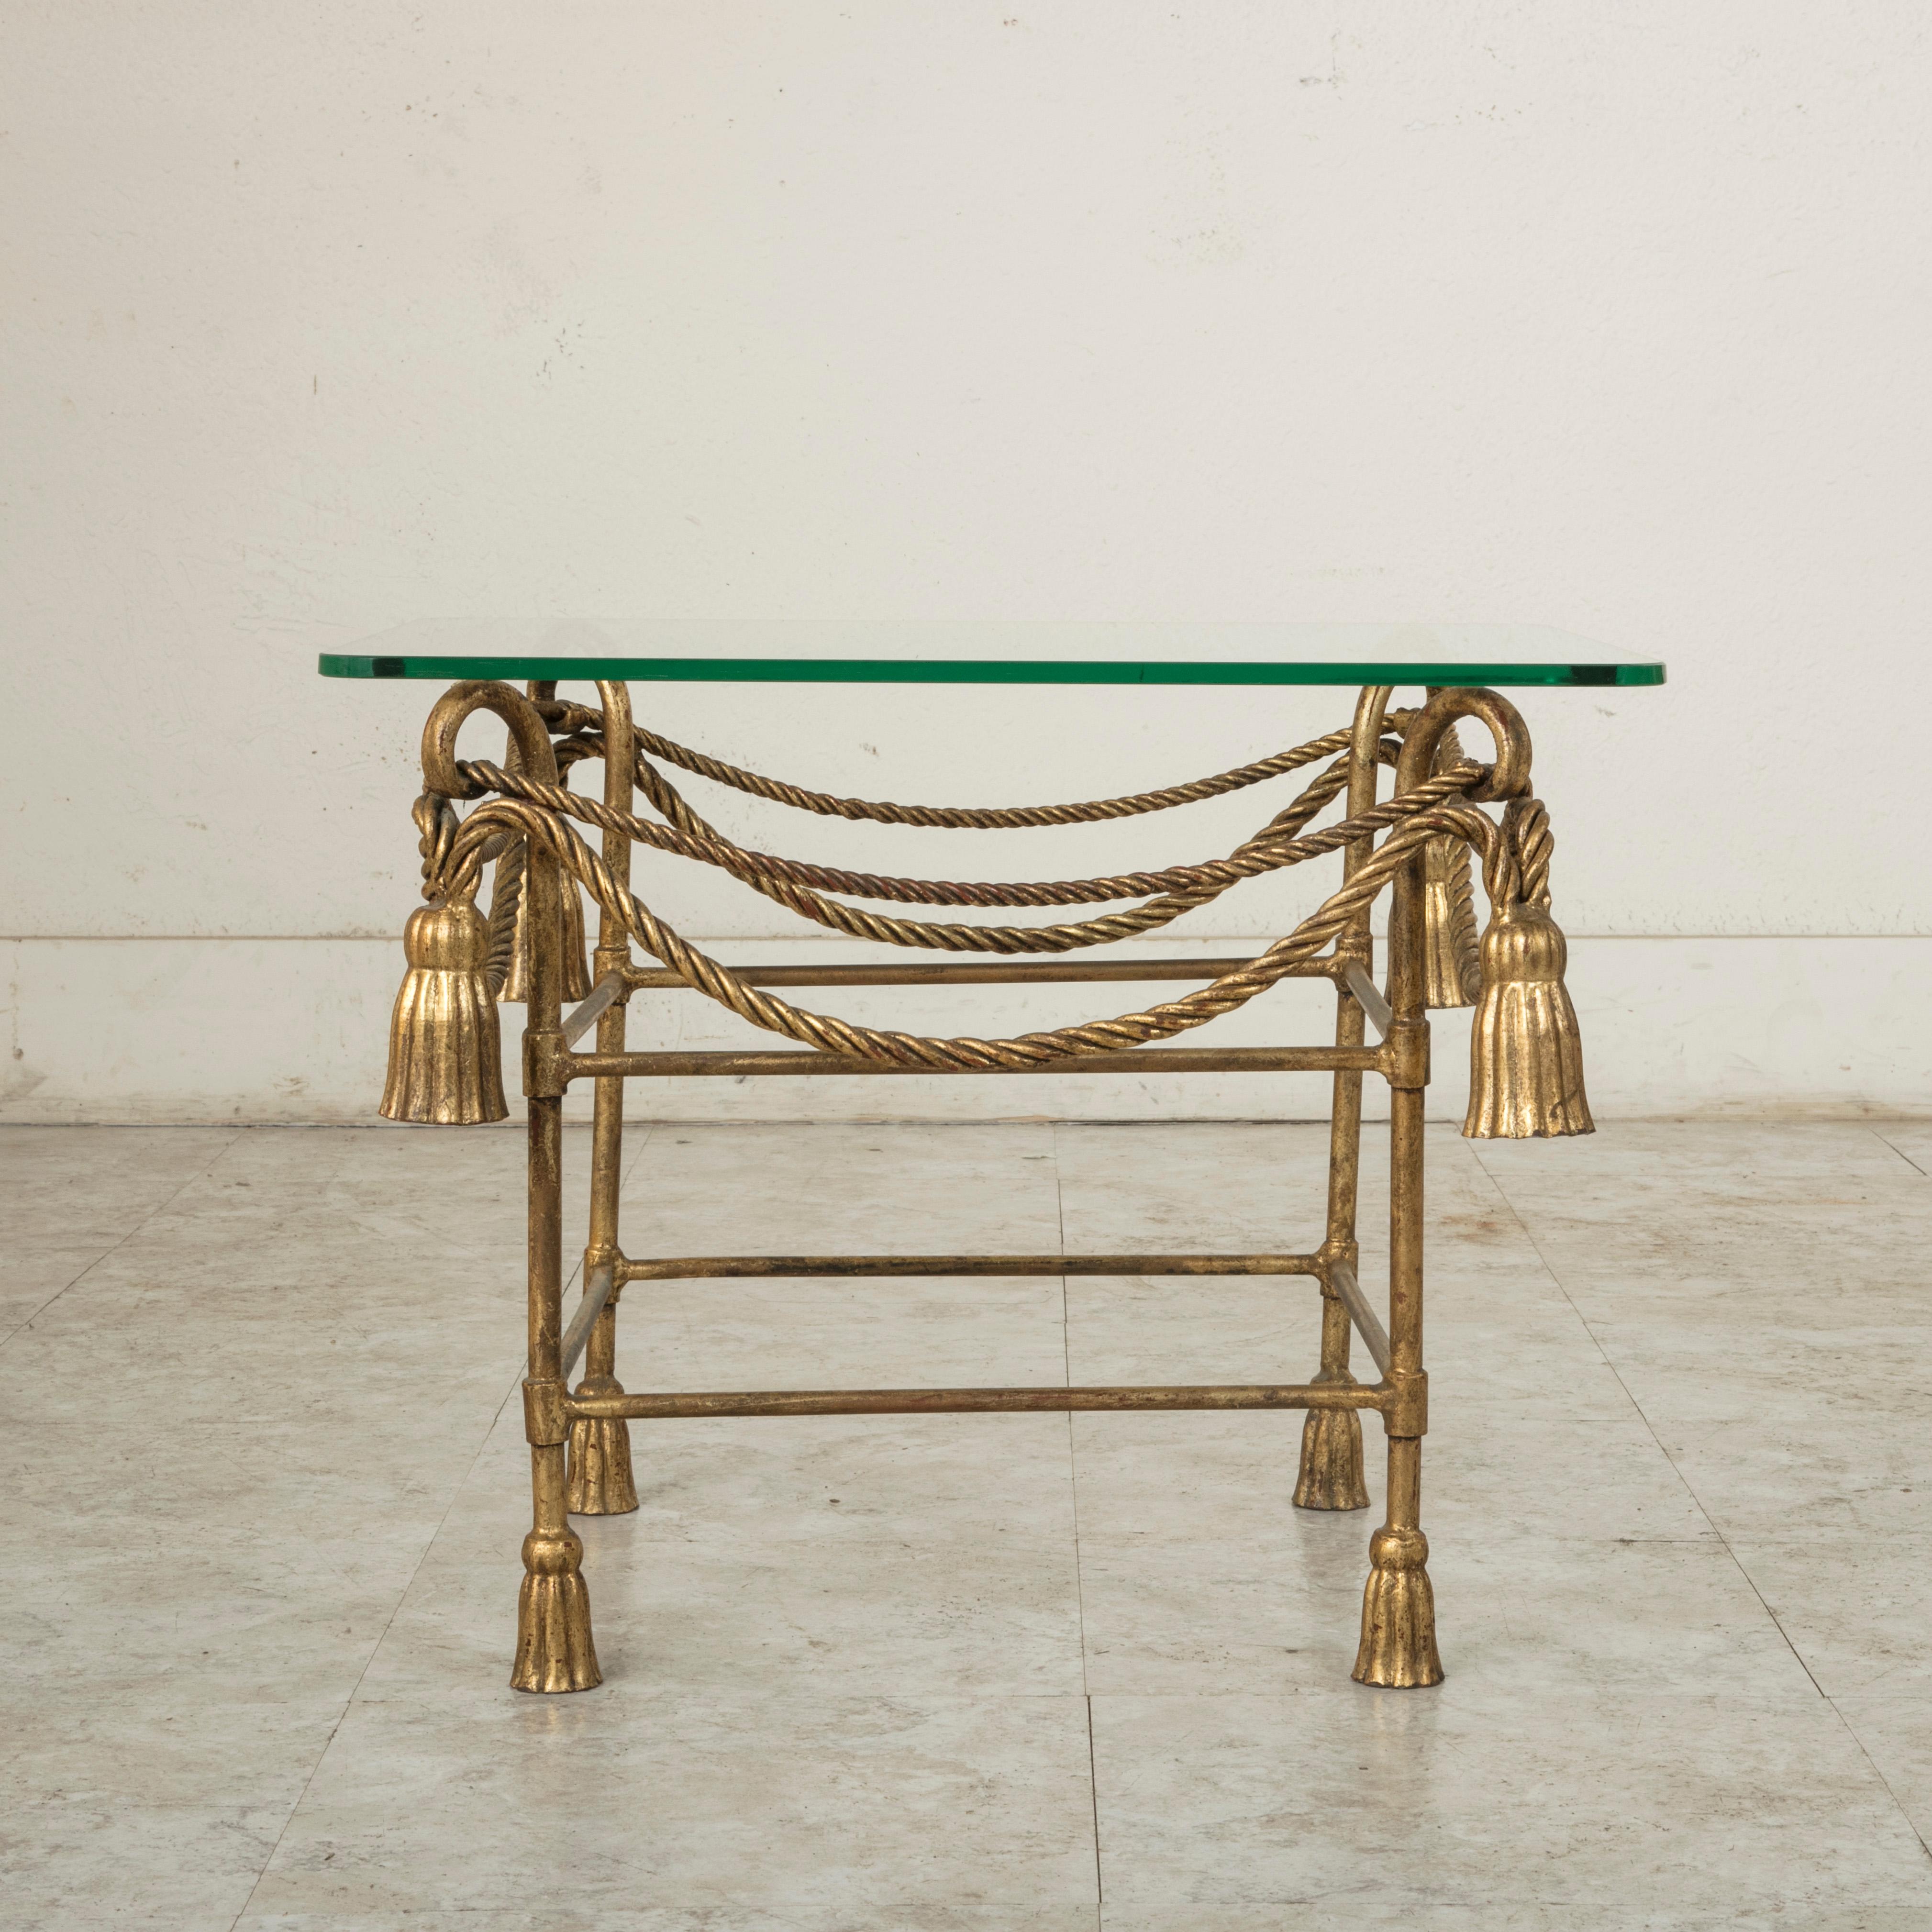 Attributed to French designer Jean-Charles Moreux (1889-1956), this midcentury gilt iron side table or end table features rope swags and tassels that hang from its scrolling top. The piece is capped with a glass top and rests on additional tassel